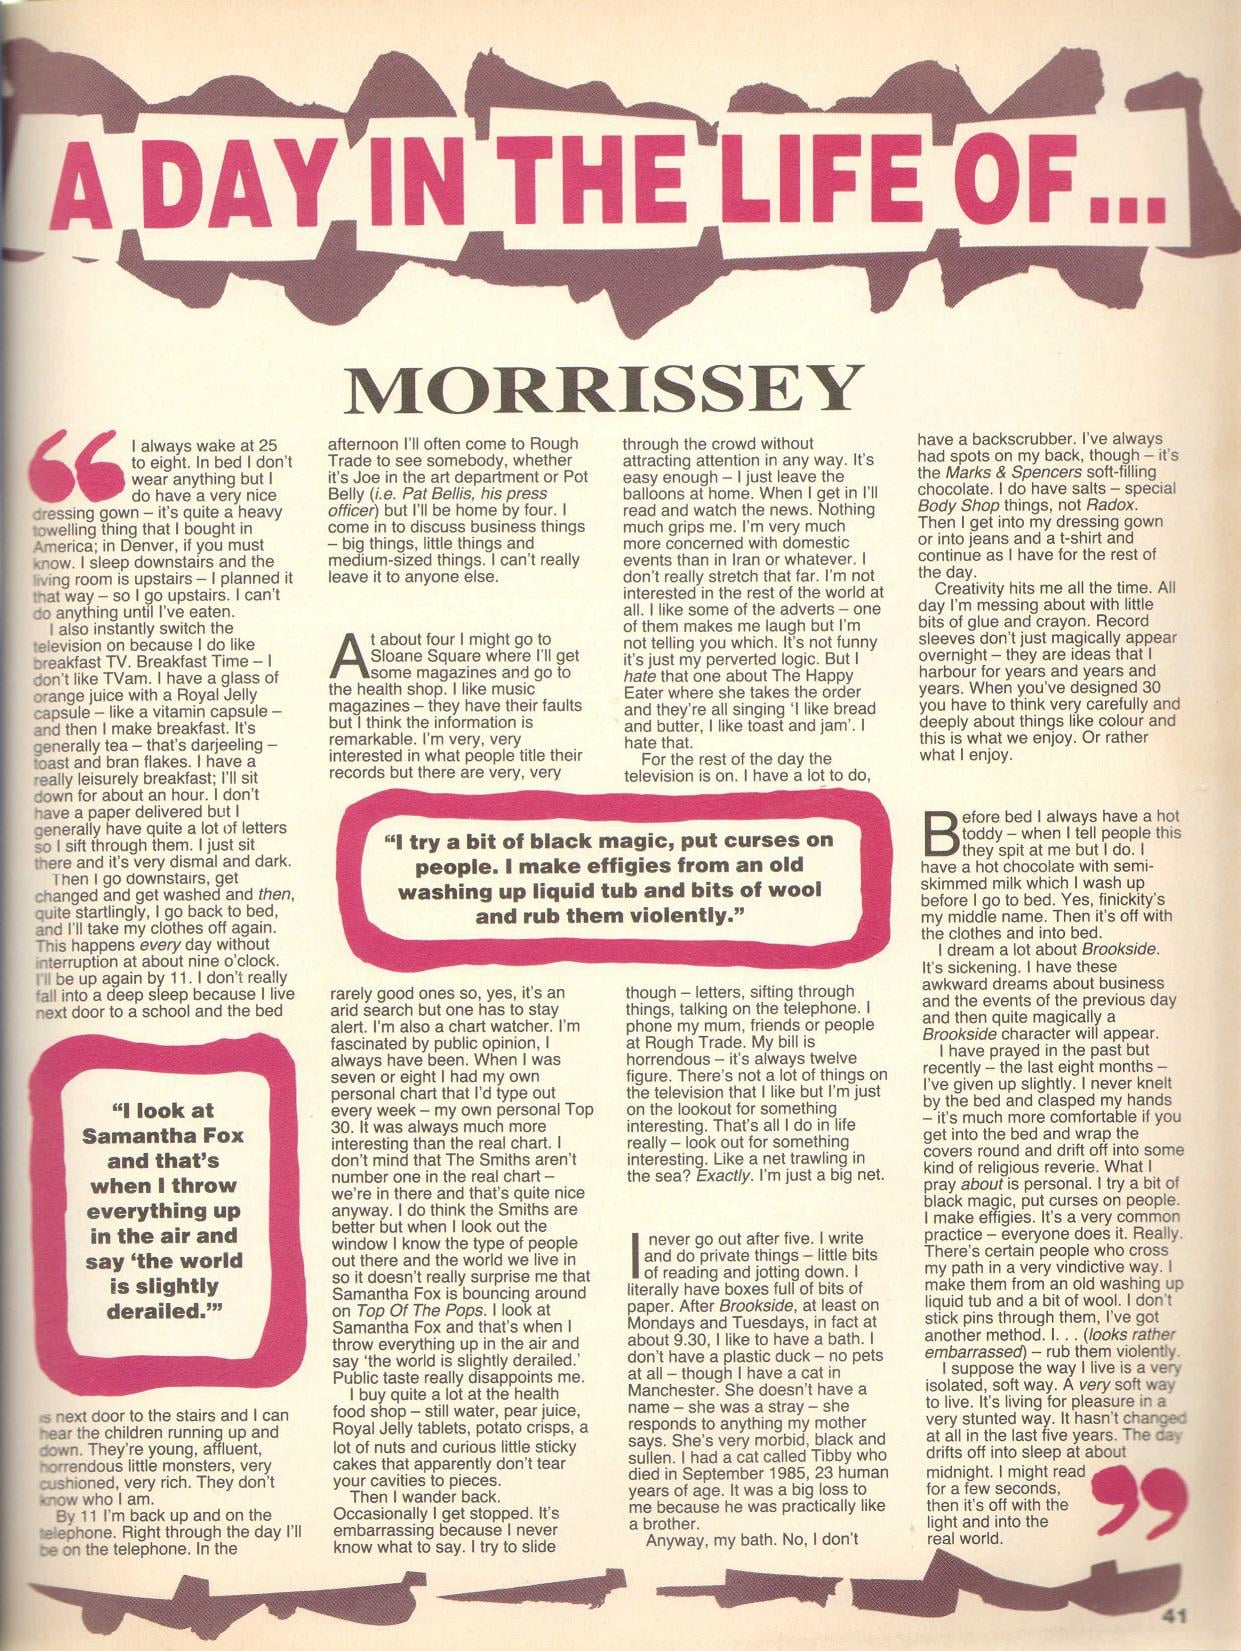 a-day-in-the-life-of-morrissey-smash-hits-1988-yearbook-v0-8mthvxgn2nob1.jpg